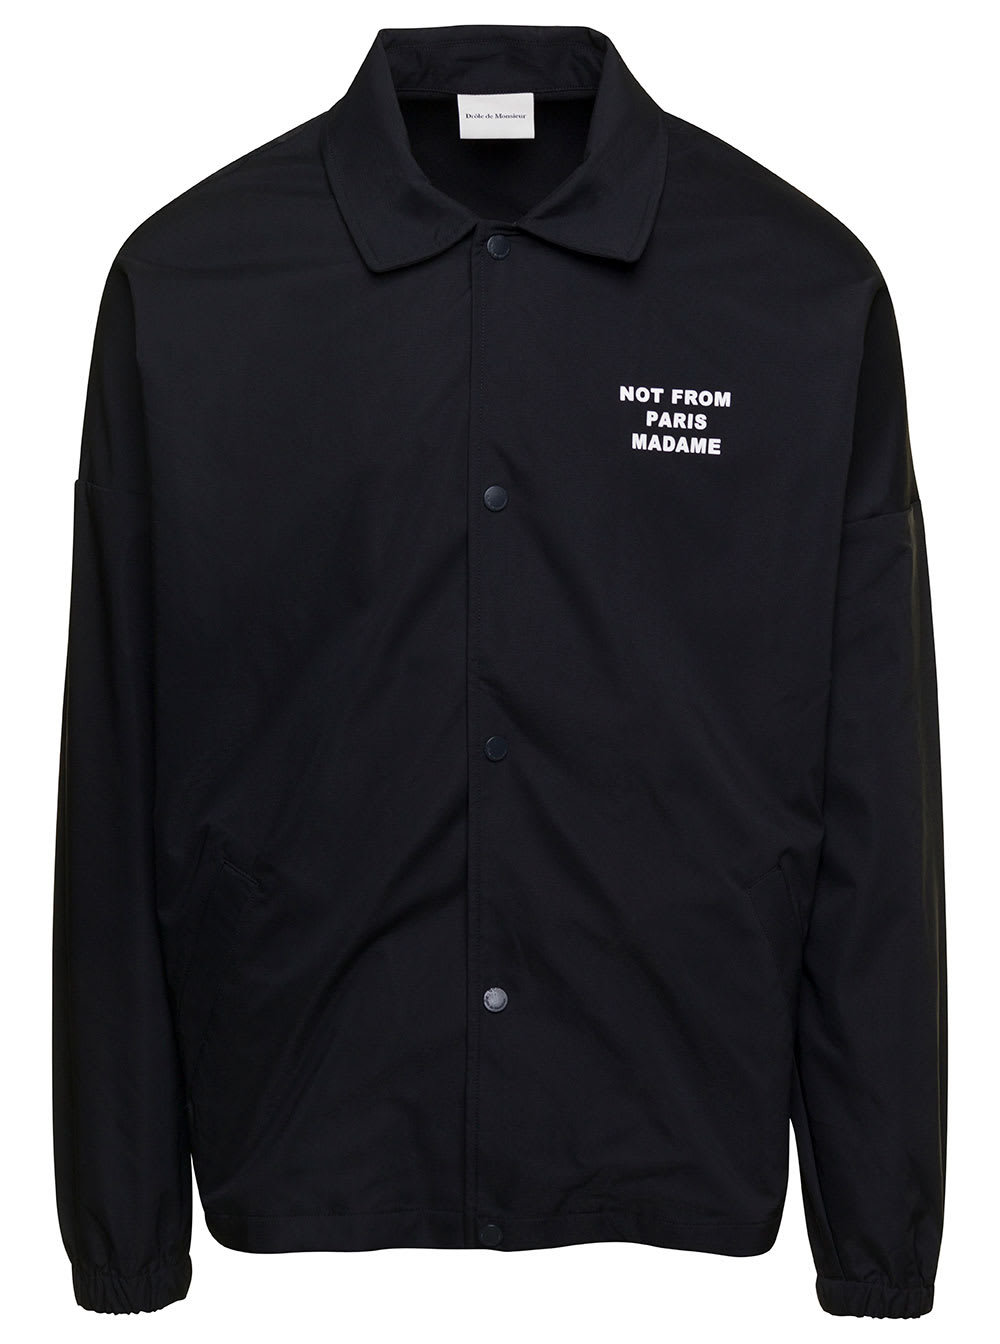 DRÔLE DE MONSIEUR BLACK JACKET WITH SLOGAN PRINT AT THE BACK AND AT THE FRONT IN NYLON MAN